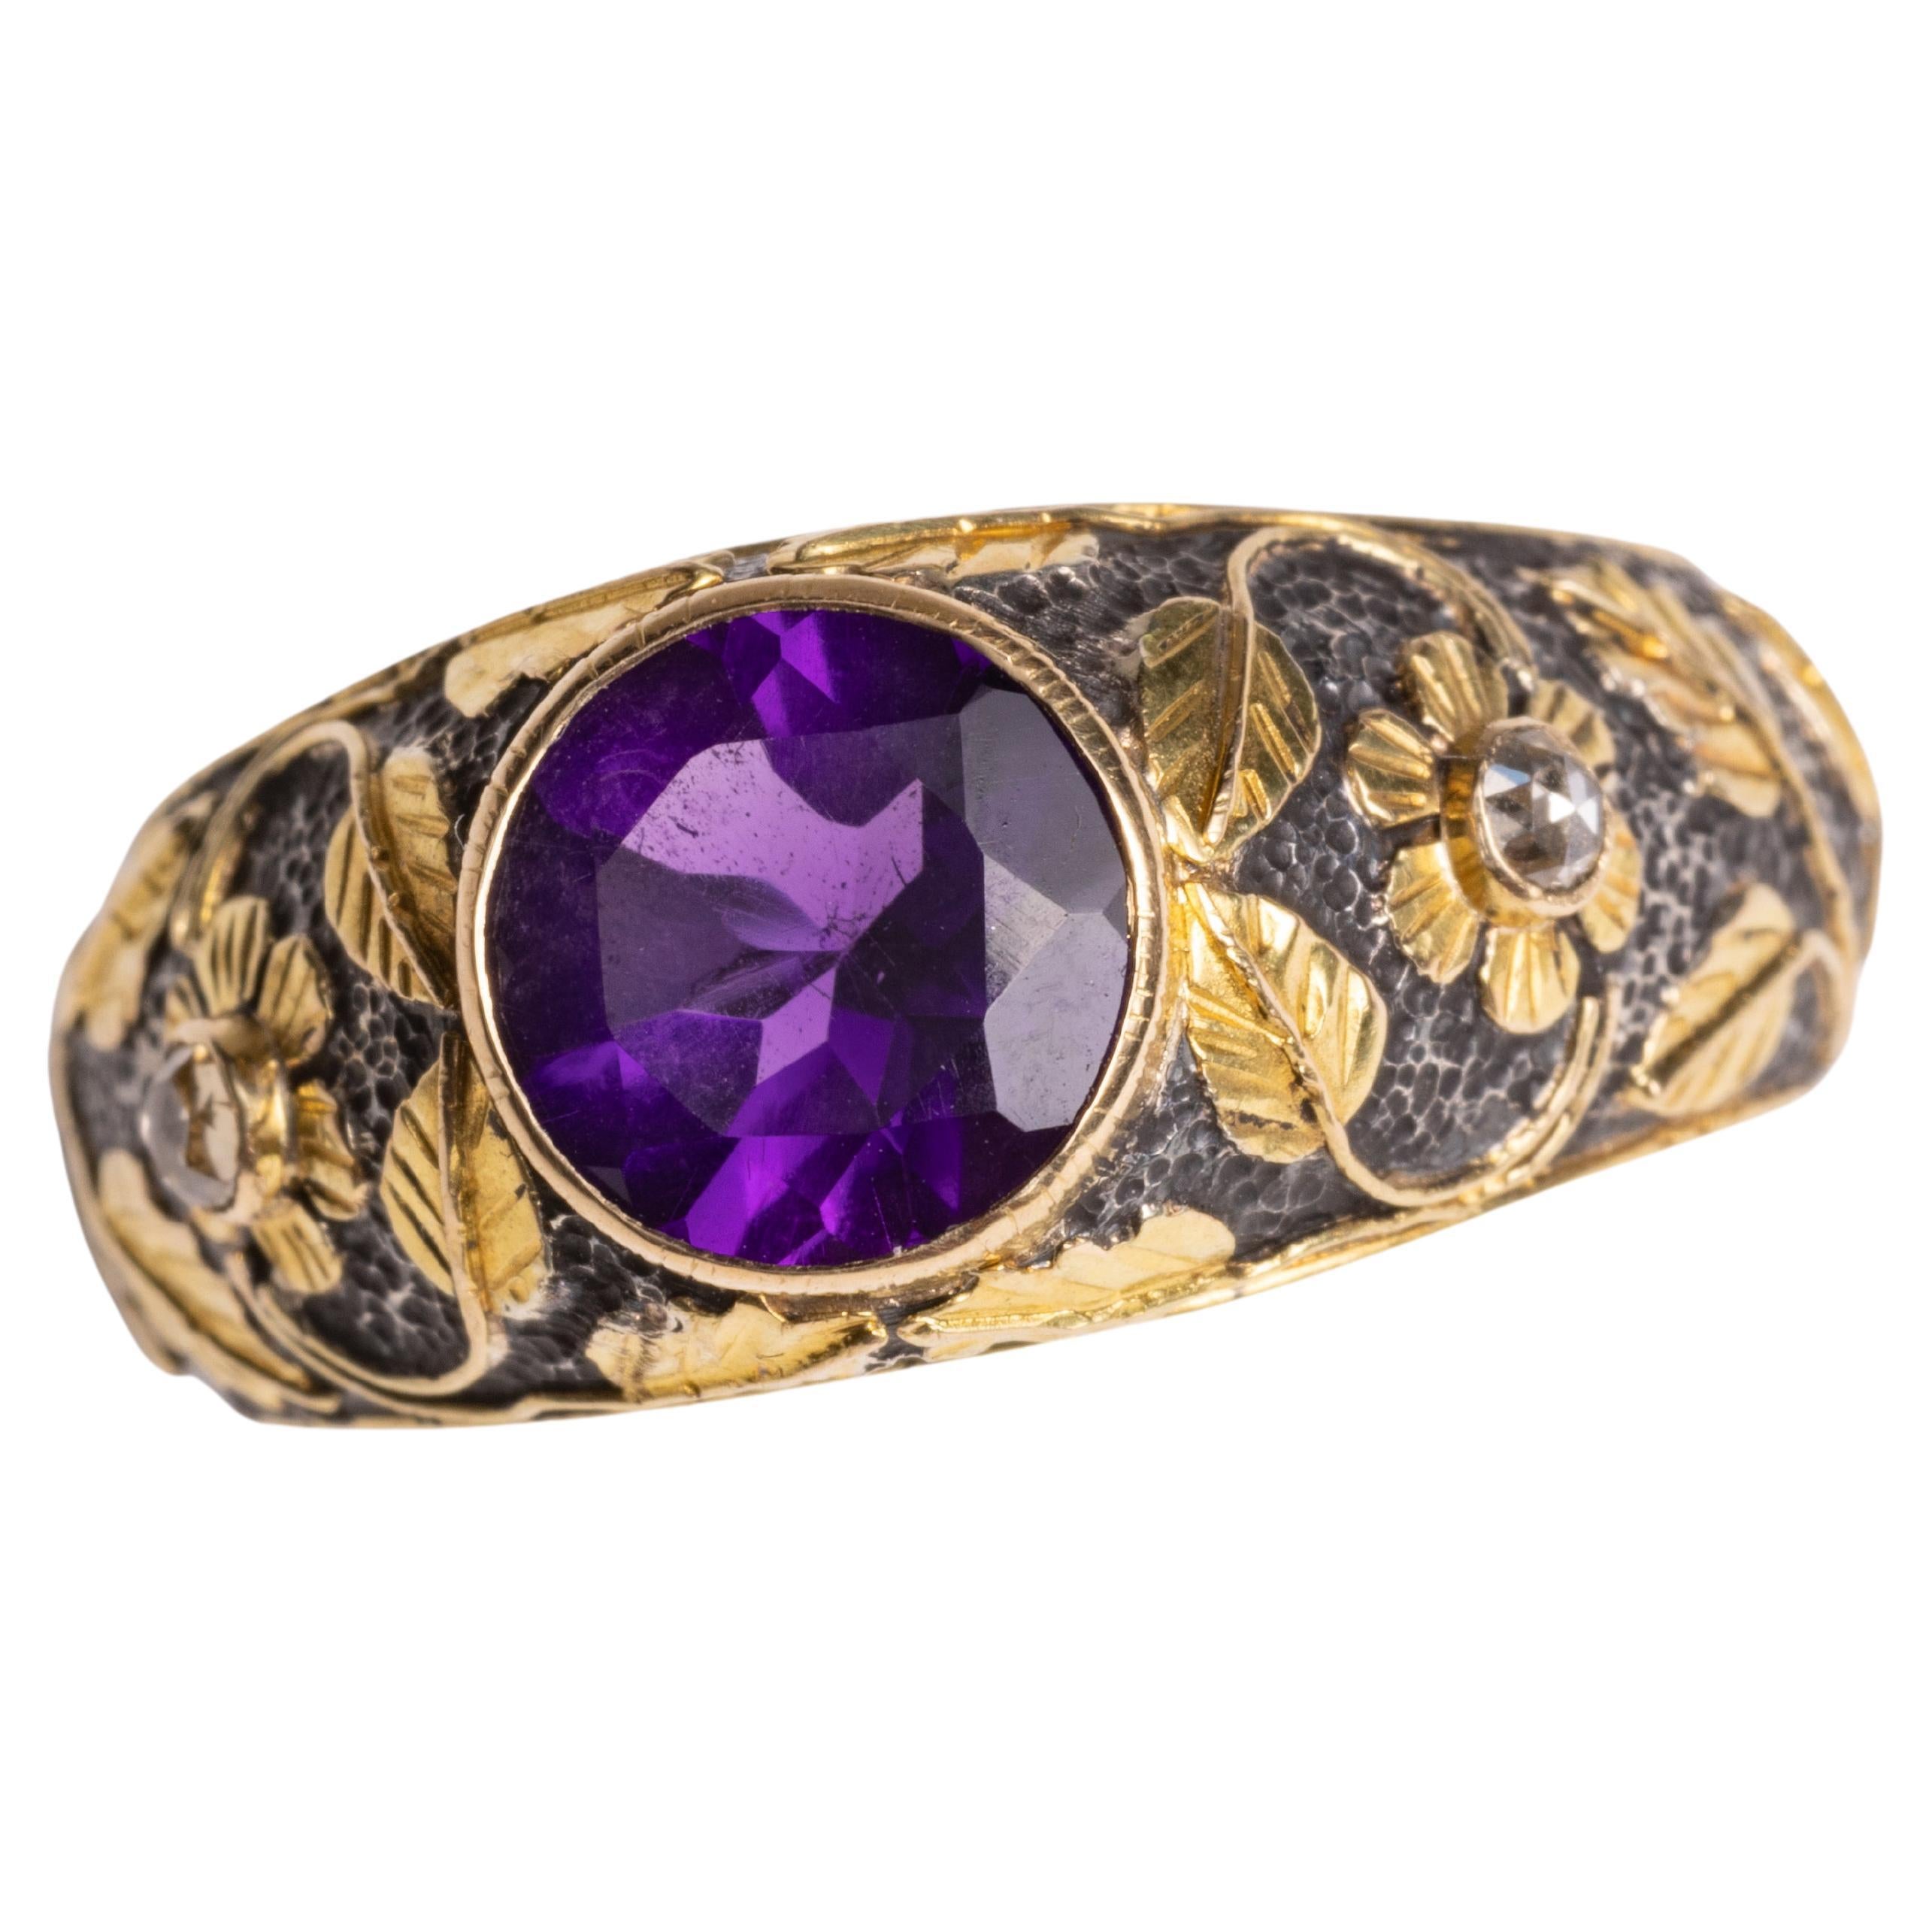 Faceted Amethyst and Diamond Ring in 18K Gold and Sterling